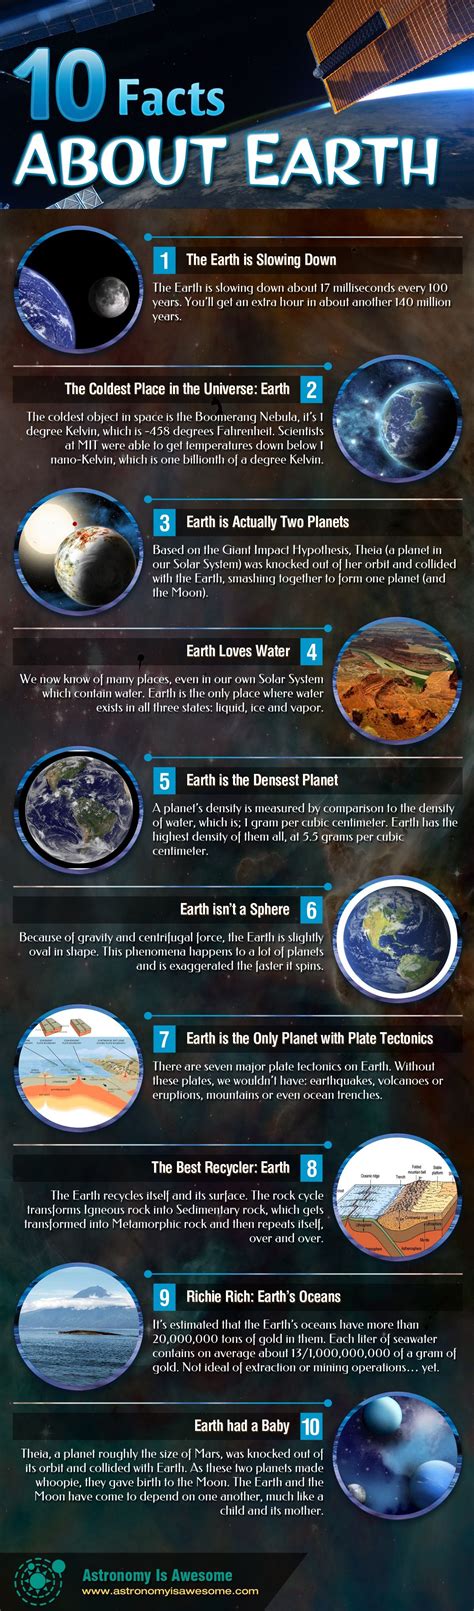 10 Facts About Earth Astronomy Is Awesome Facts About Earth Earth